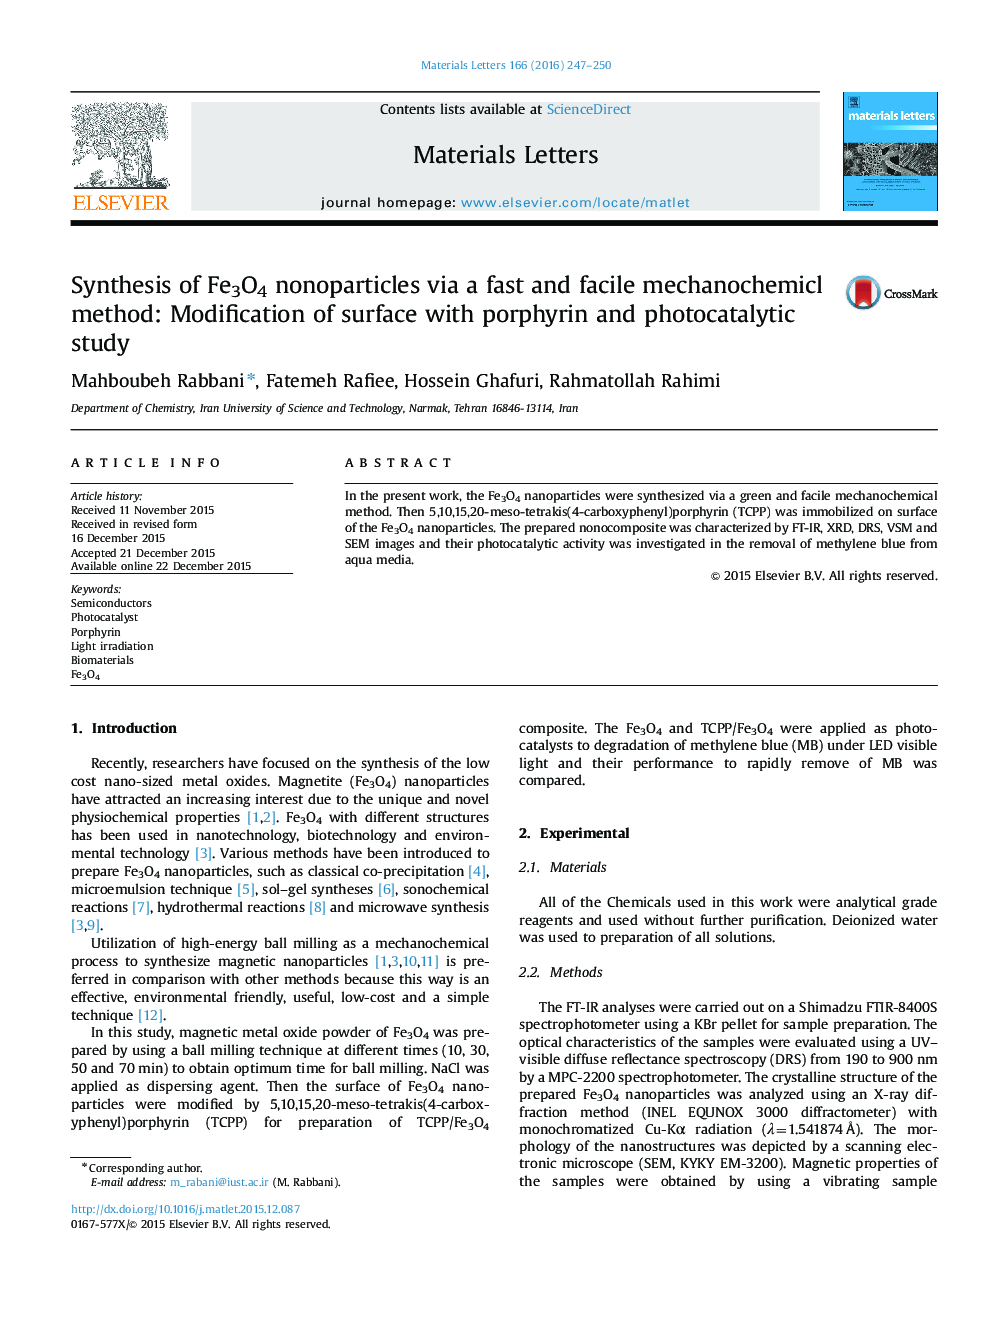 Synthesis of Fe3O4 nonoparticles via a fast and facile mechanochemicl method: Modification of surface with porphyrin and photocatalytic study